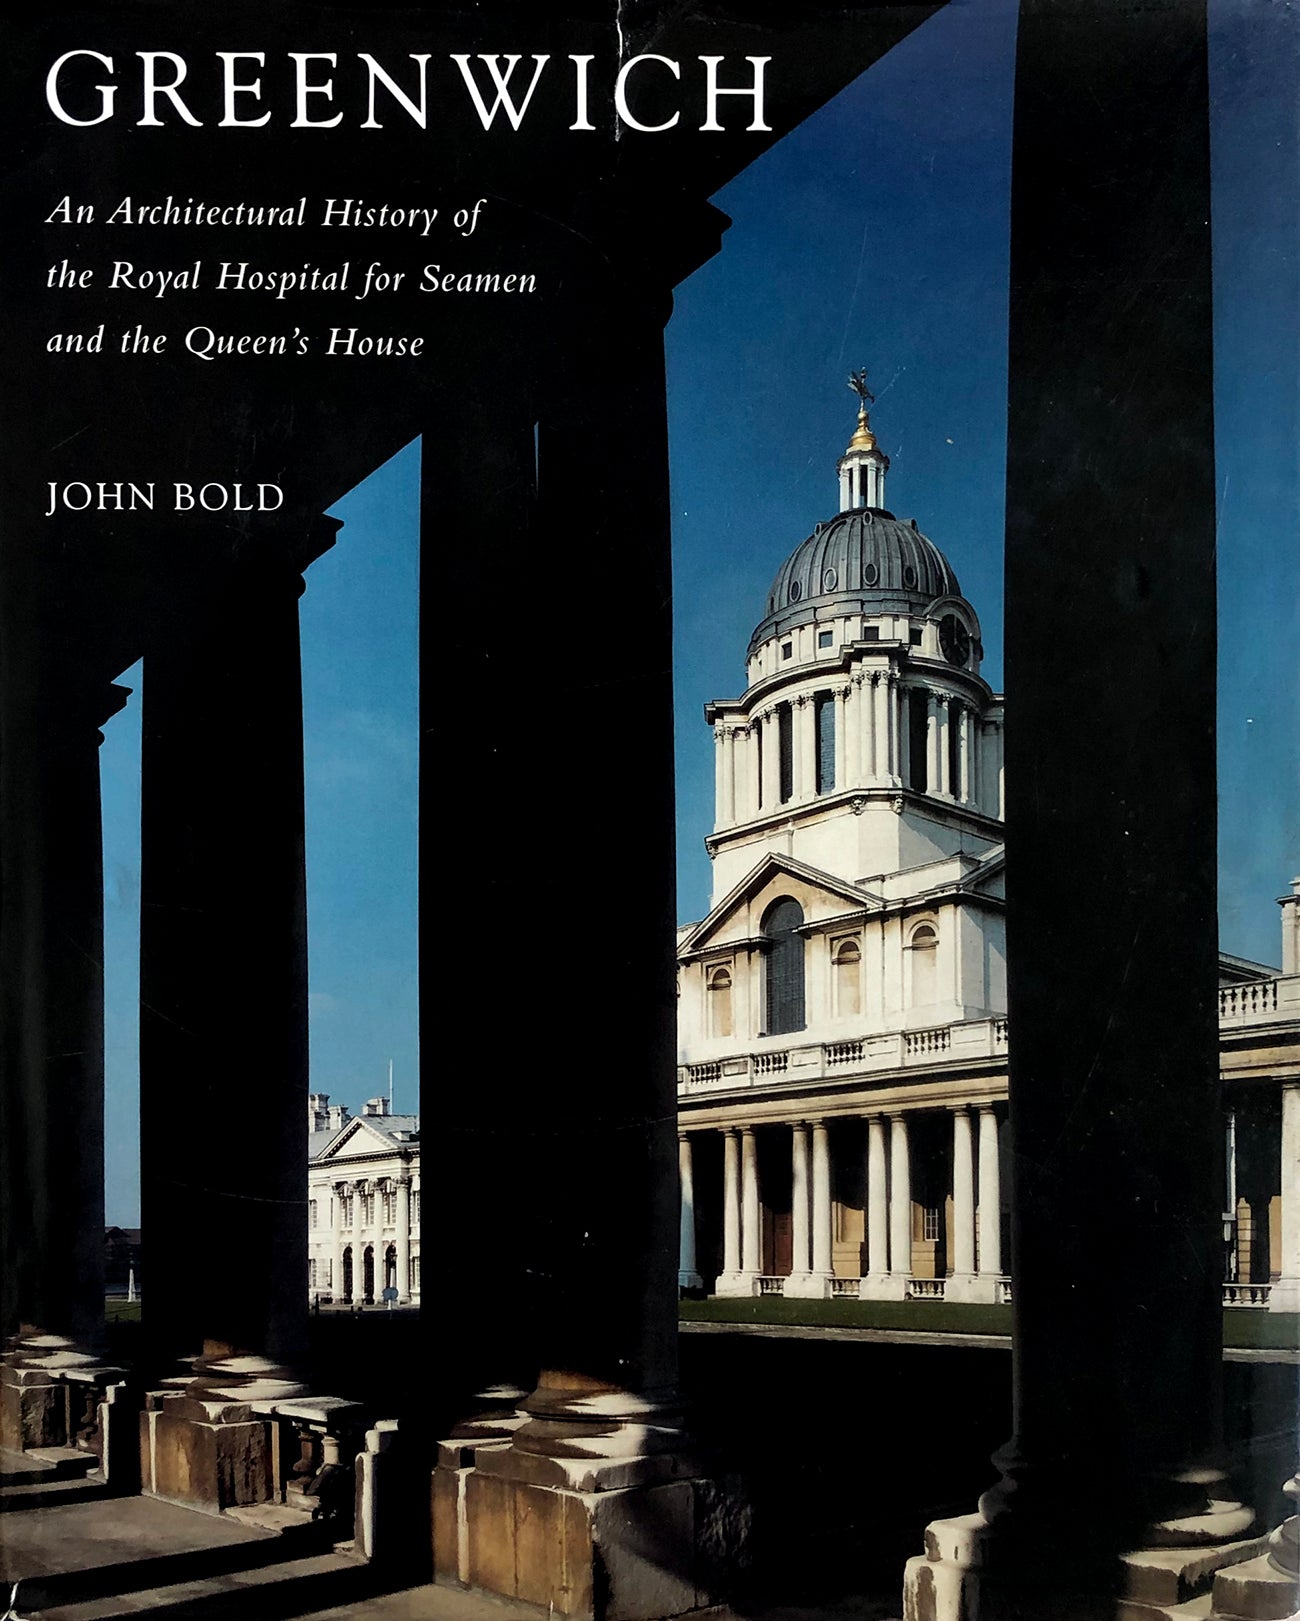 Greenwich: An Architectural History of the Royal Hospital for Seamen and the Queen's House